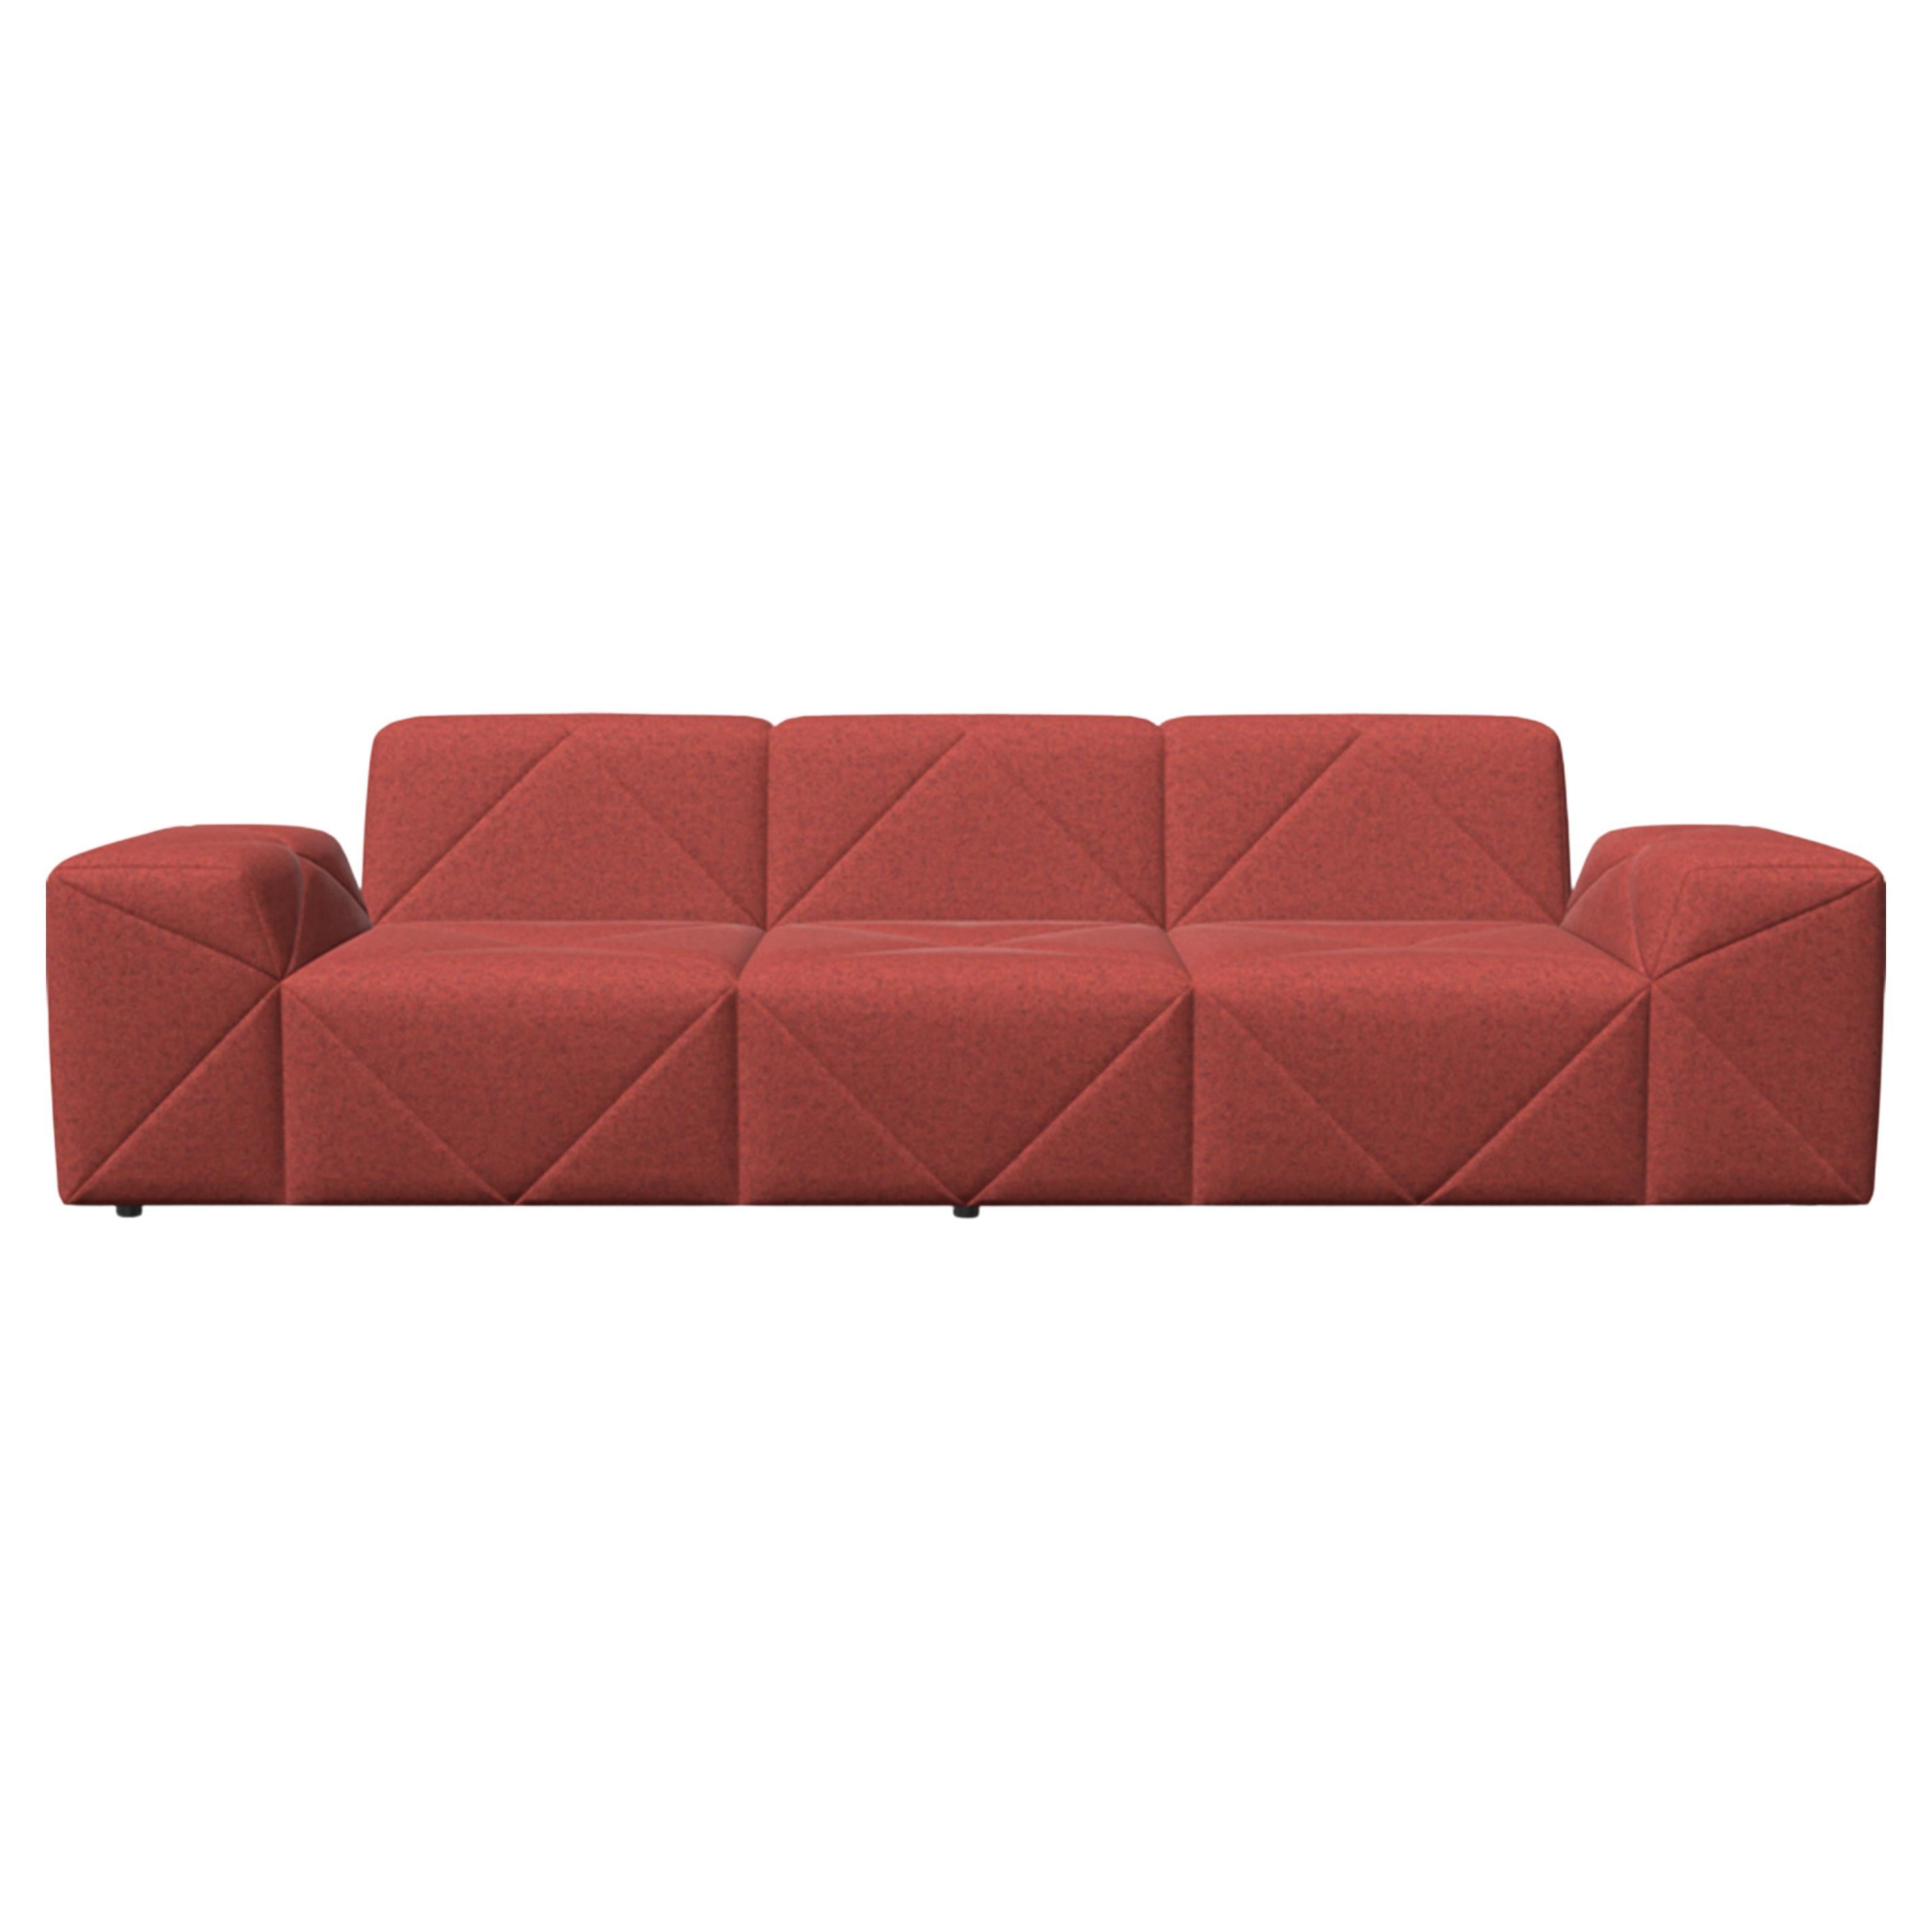 Moooi BFF Triple Seater TE01 Low Sofa in Divina Melange 3, 557 Red Upholstery For Sale